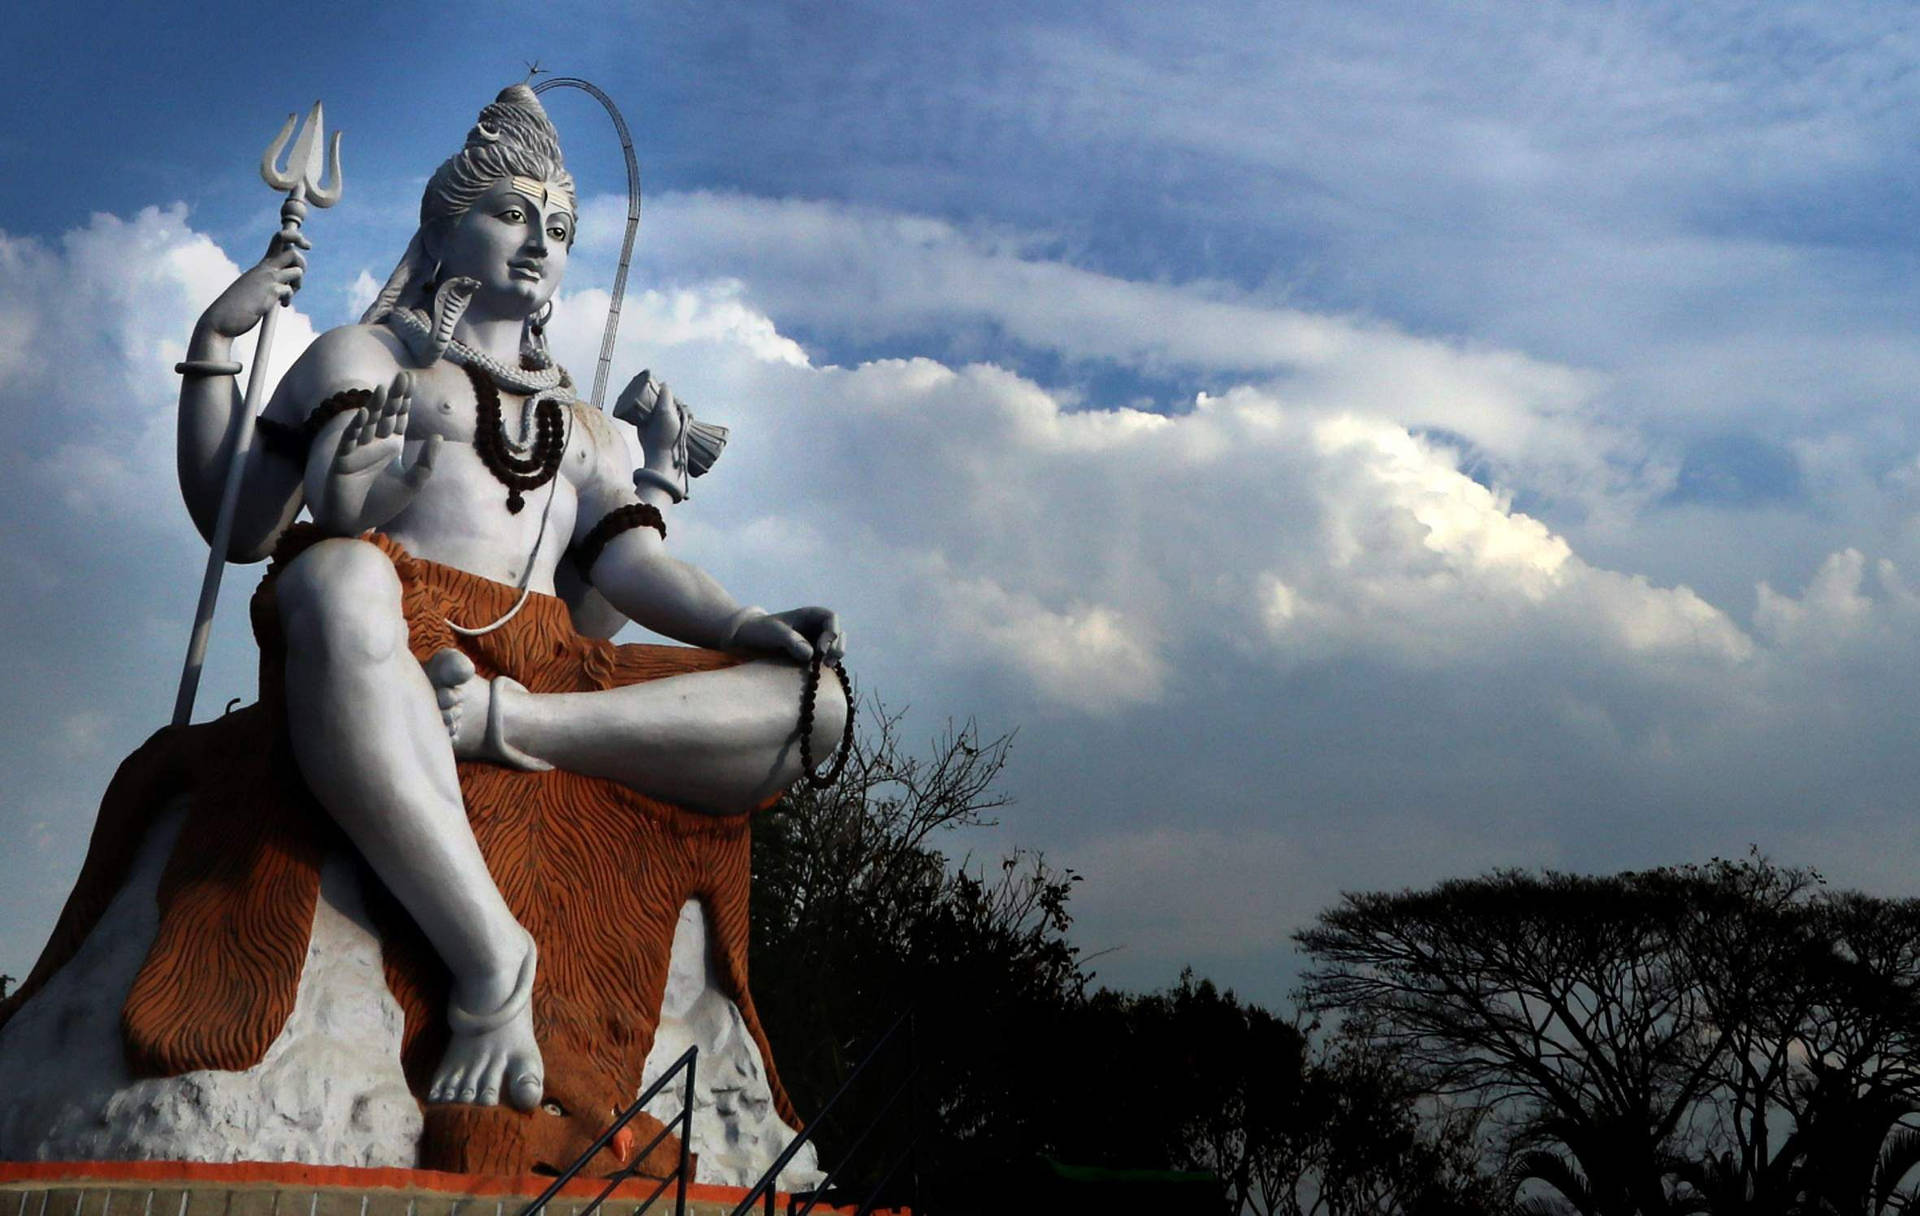 Shiva 2362X1496 Wallpaper and Background Image